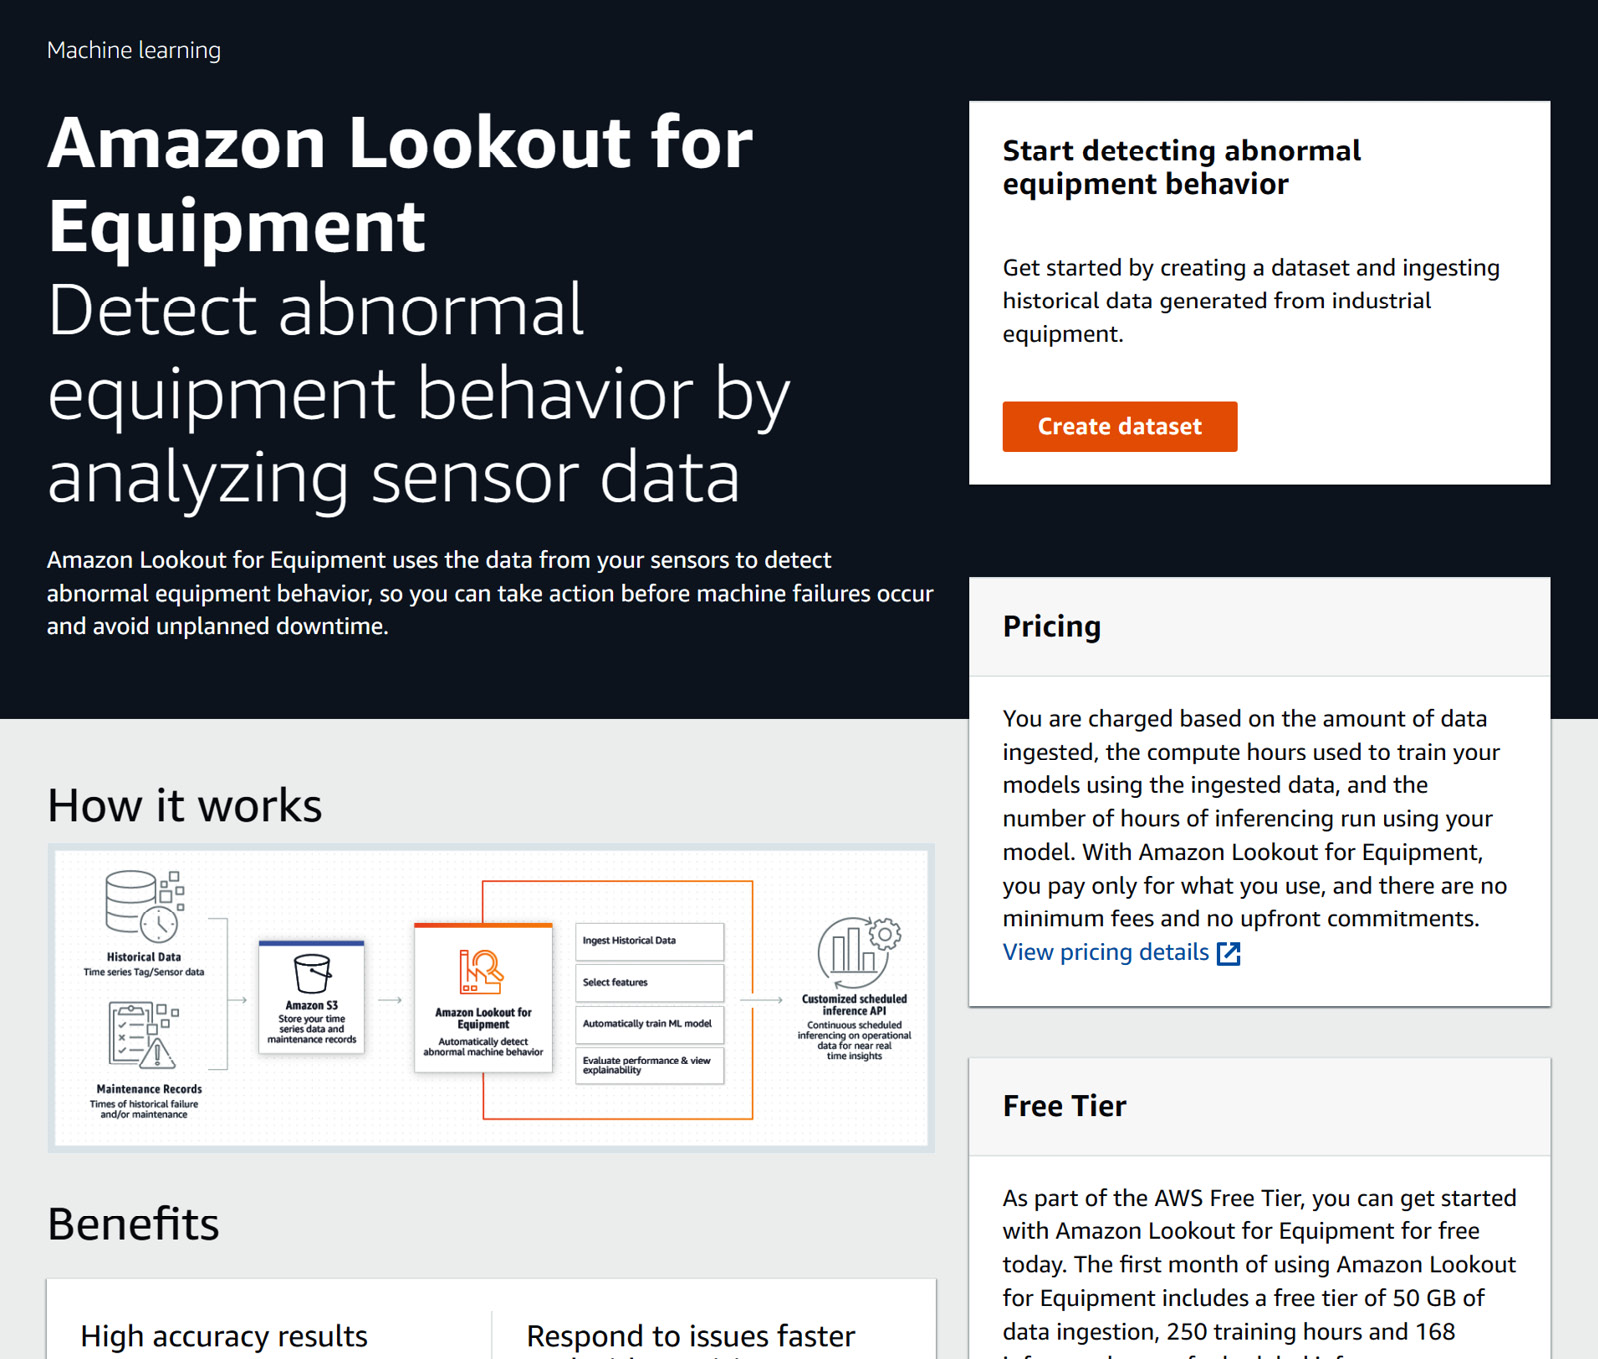 Figure 10.1 – The Amazon Lookout for Equipment home page
